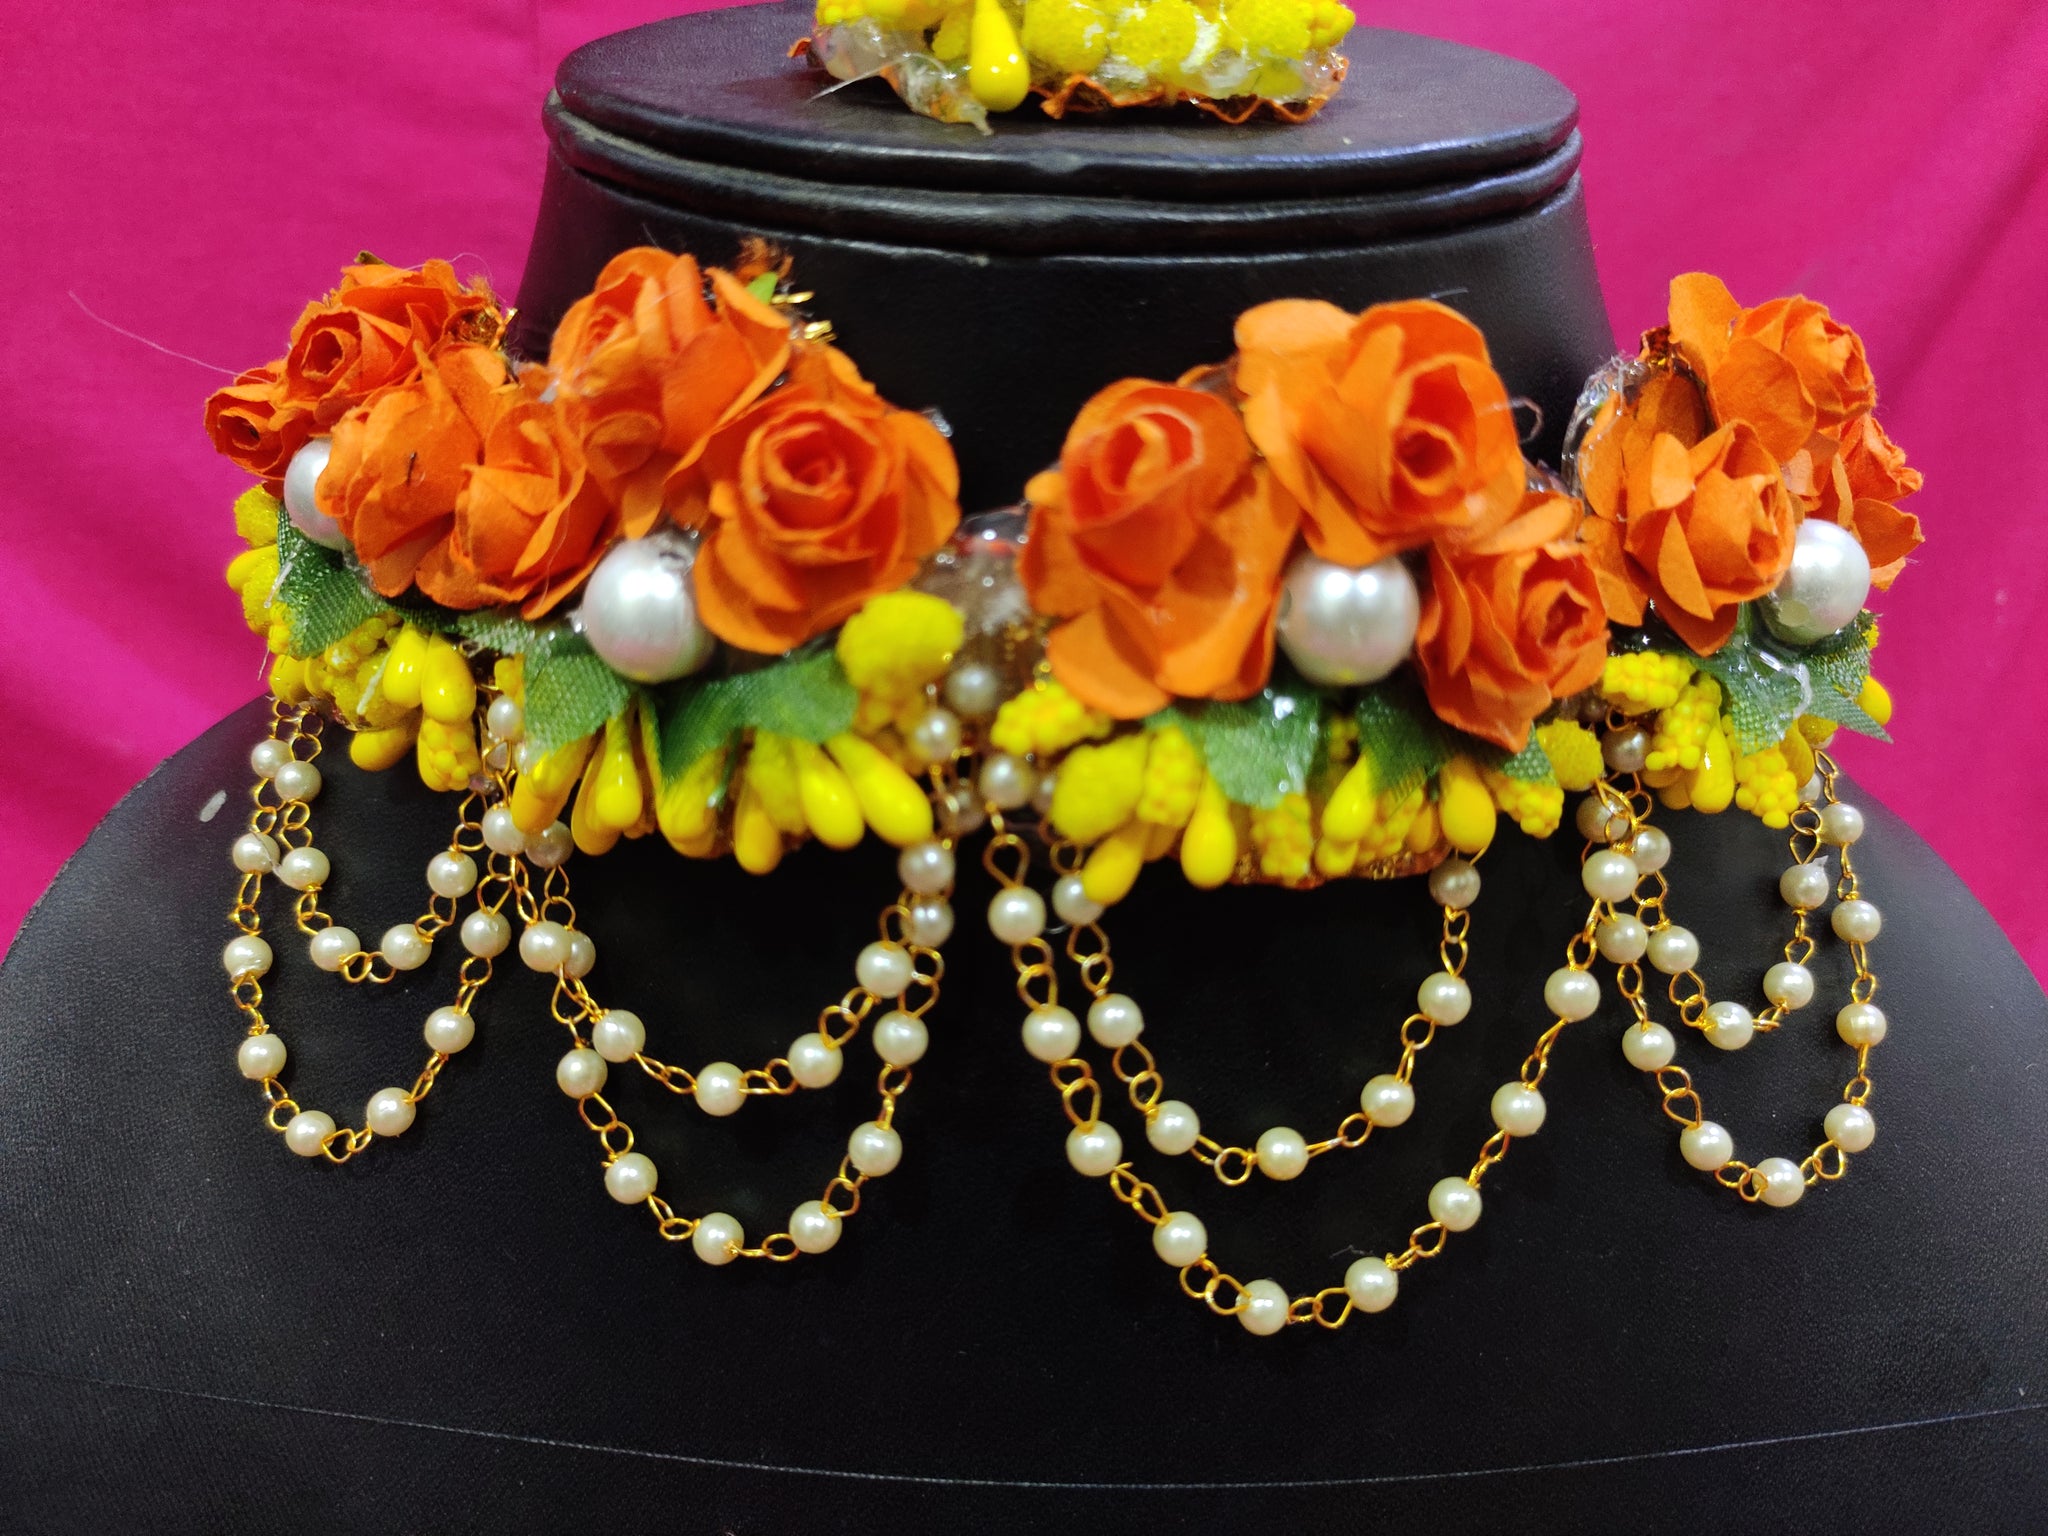 White and gold fondant flower cake by Kukkr Cakes